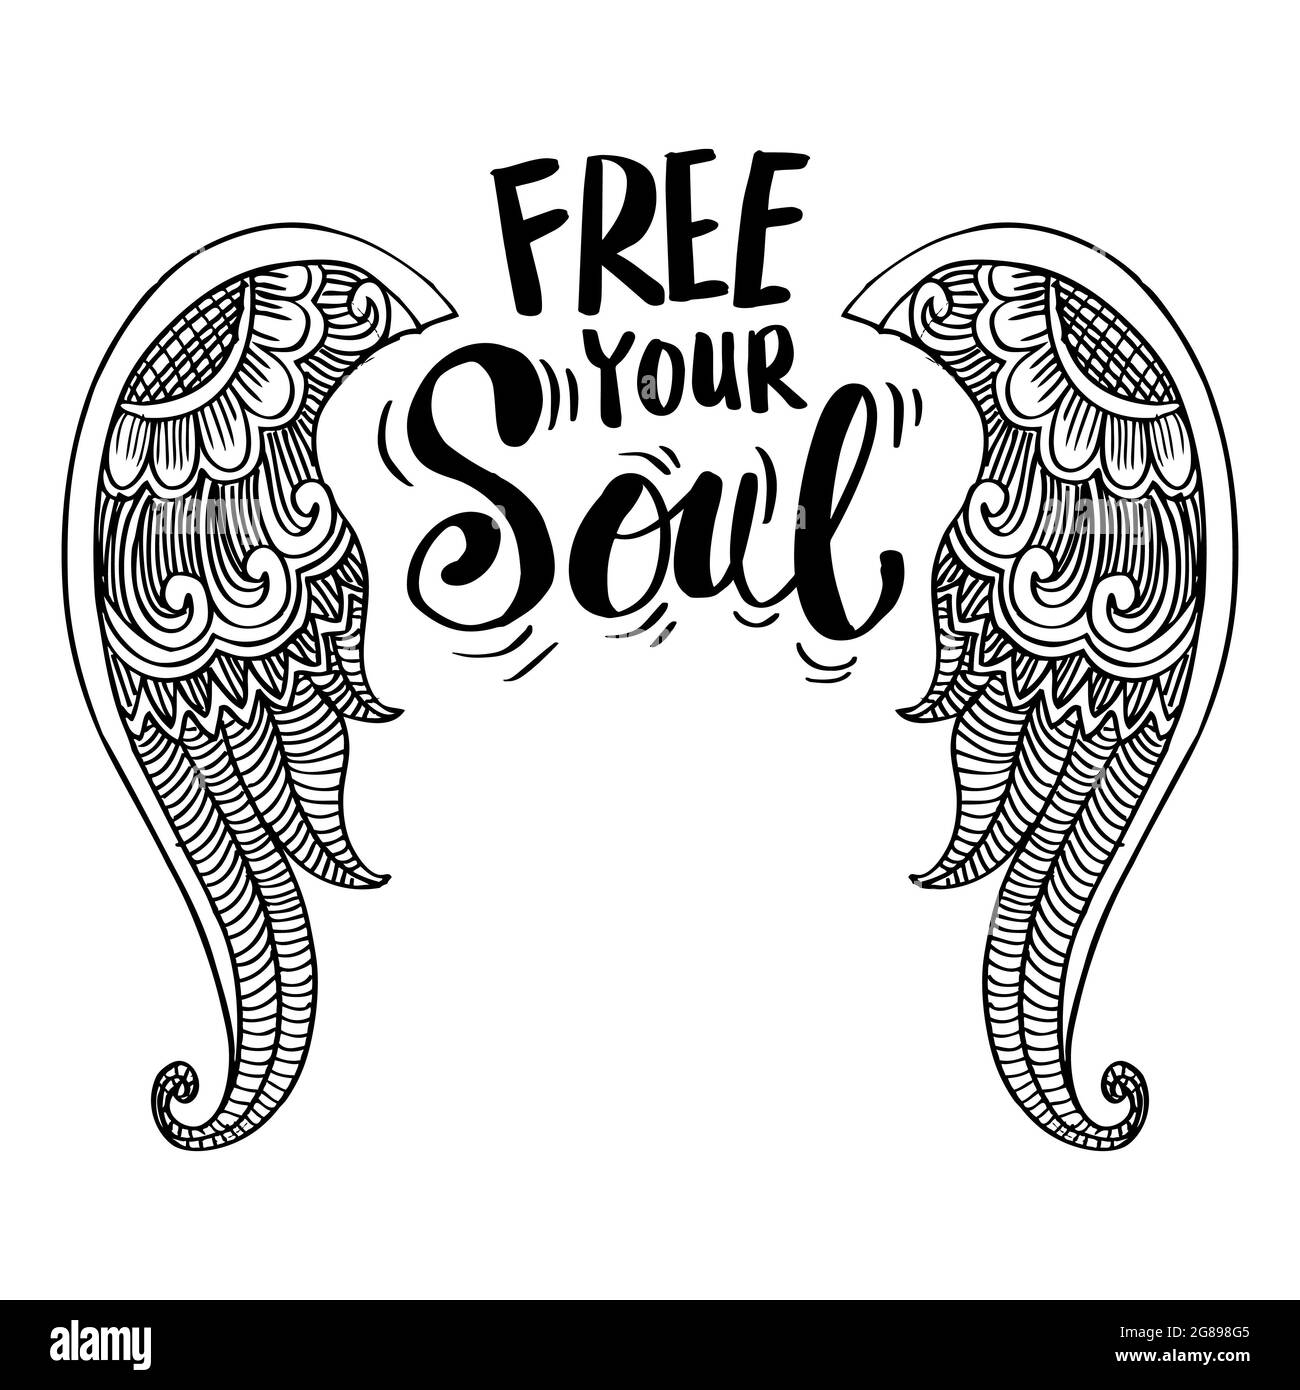 Free your soul hand lettering with wings. Motivational quote. Stock Photo